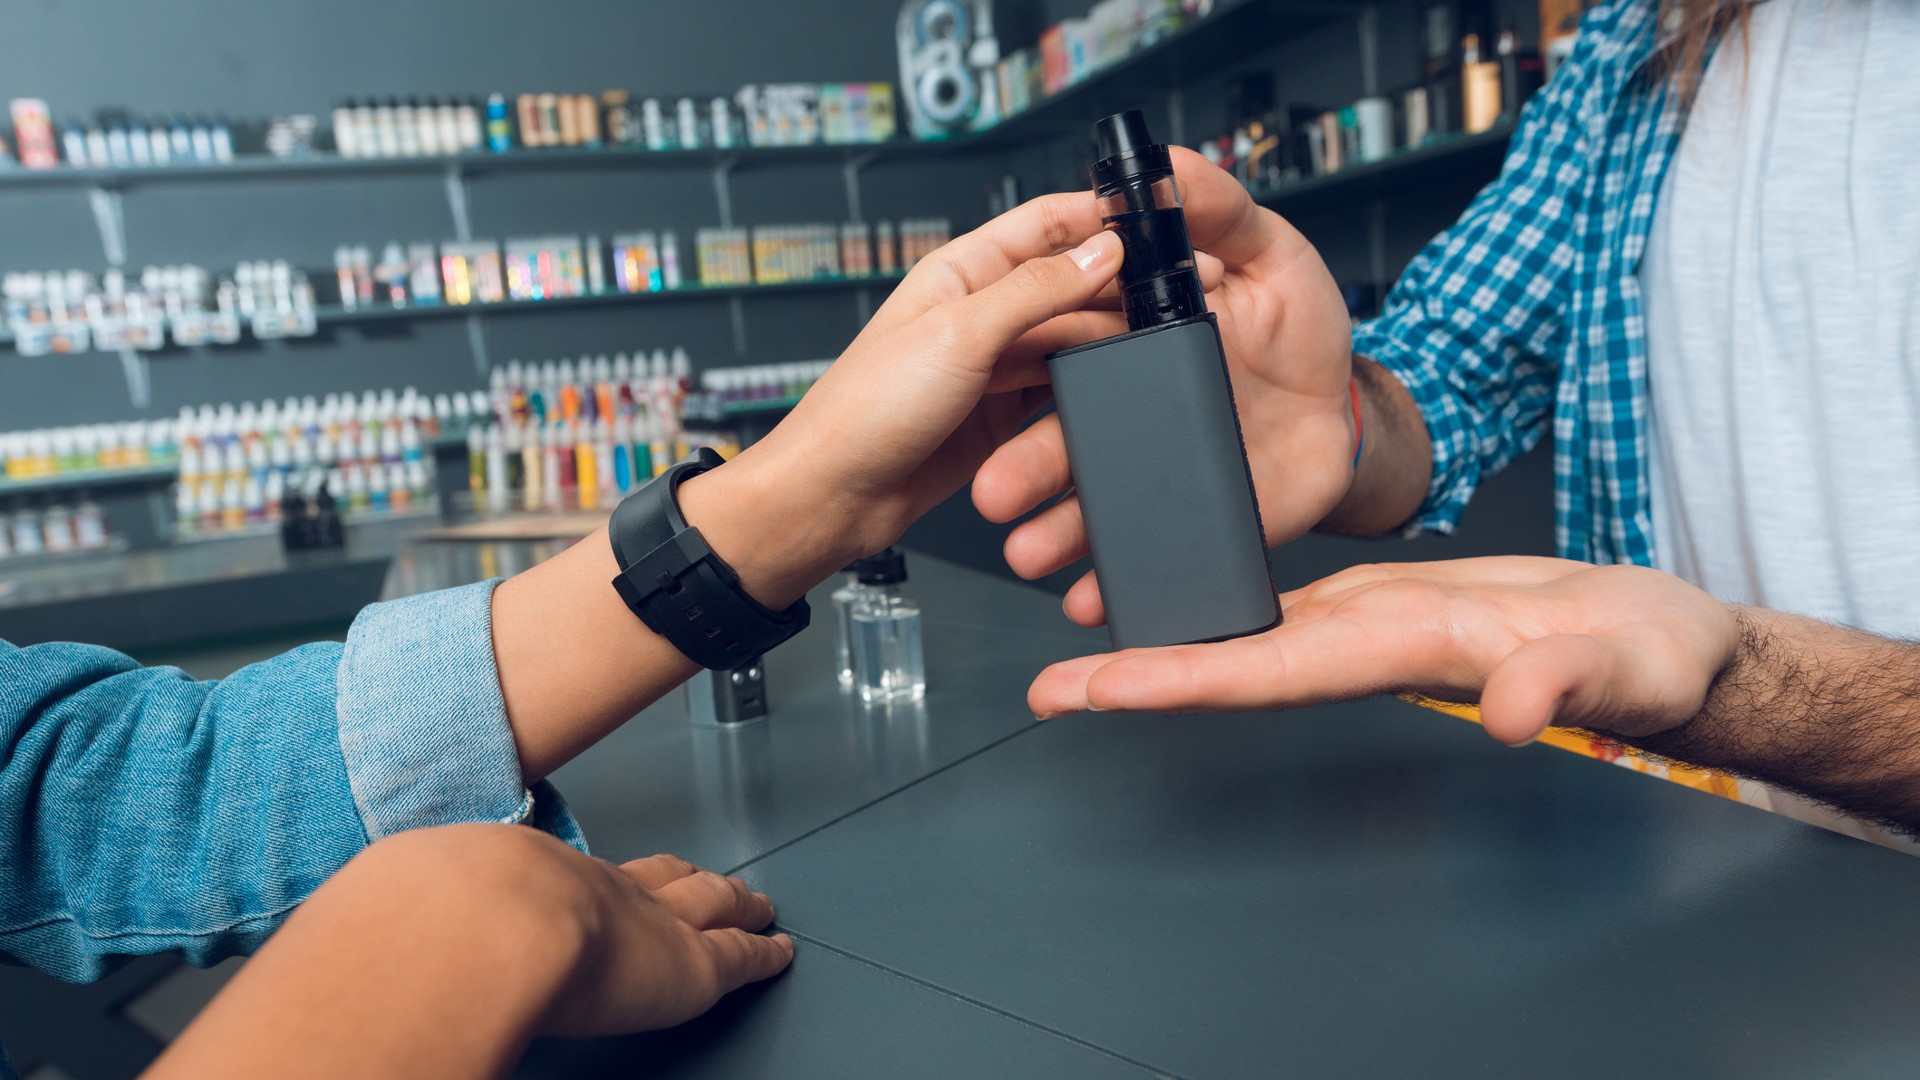 The girl came to the vapeshop. She talks with the seller - a tall man with long hair and a beard. The store has a large selection of electronic cigarettes.